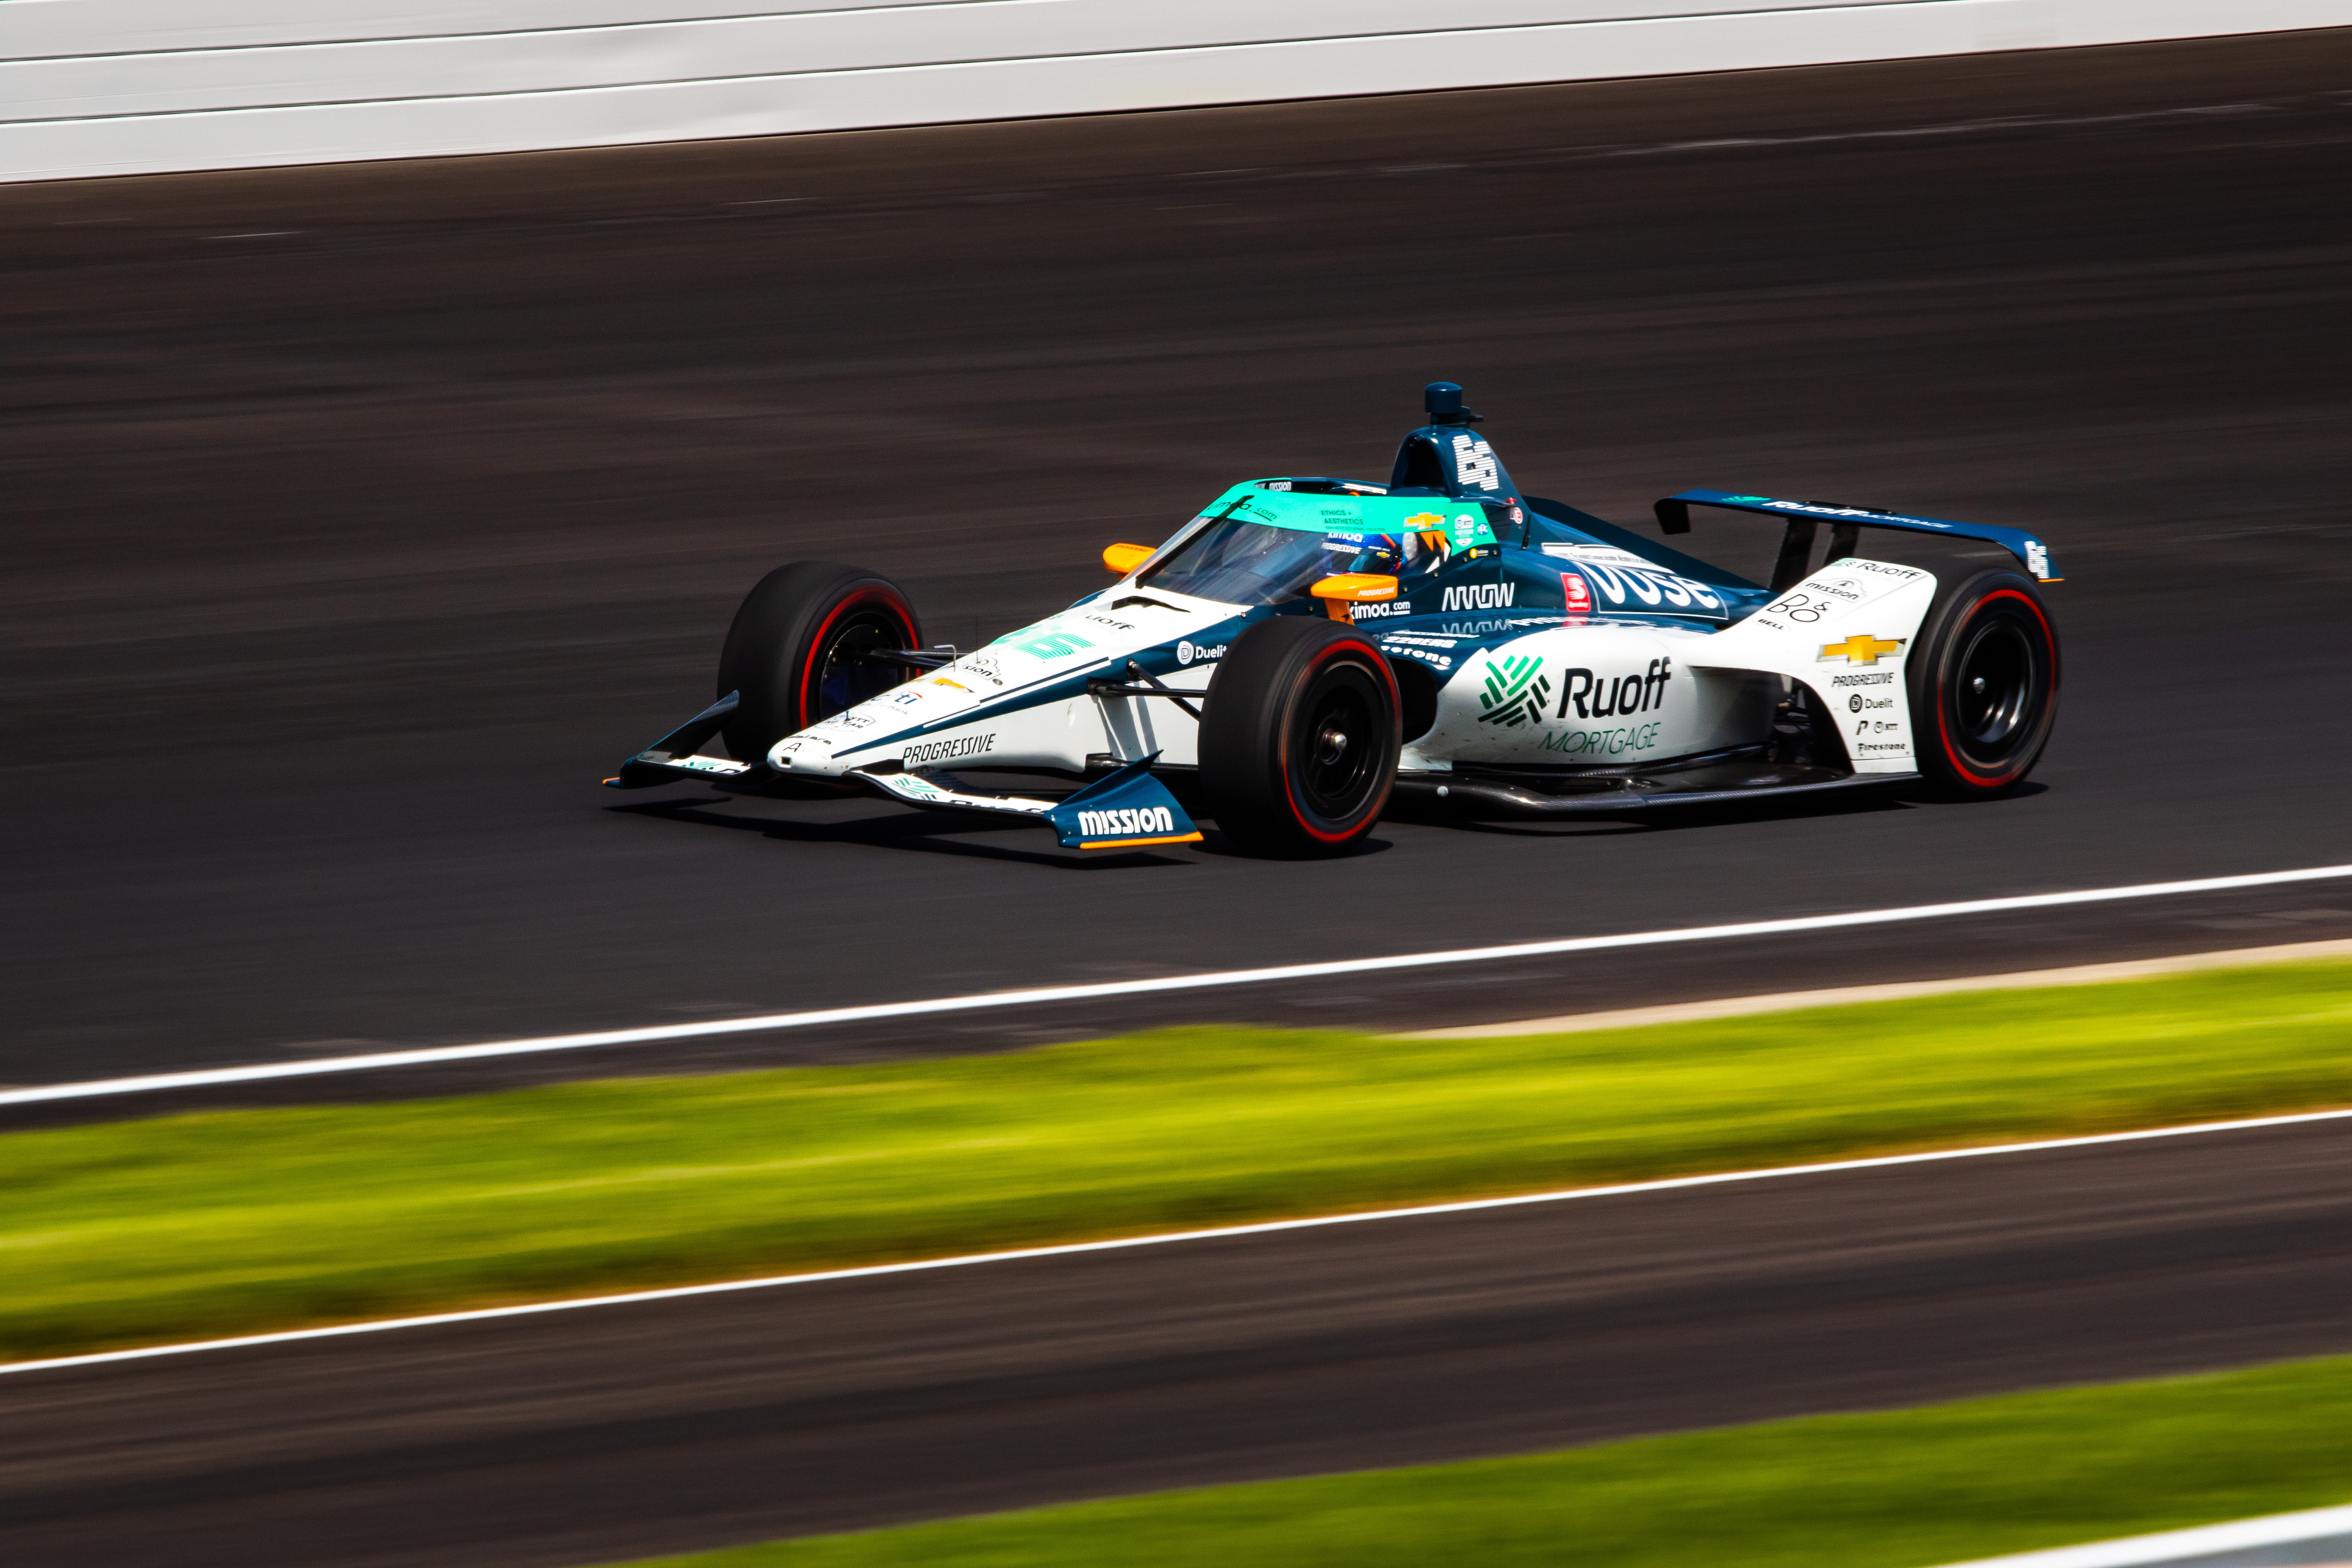 Ntt Indycar Series 104th Running Of The Indianapolis 500